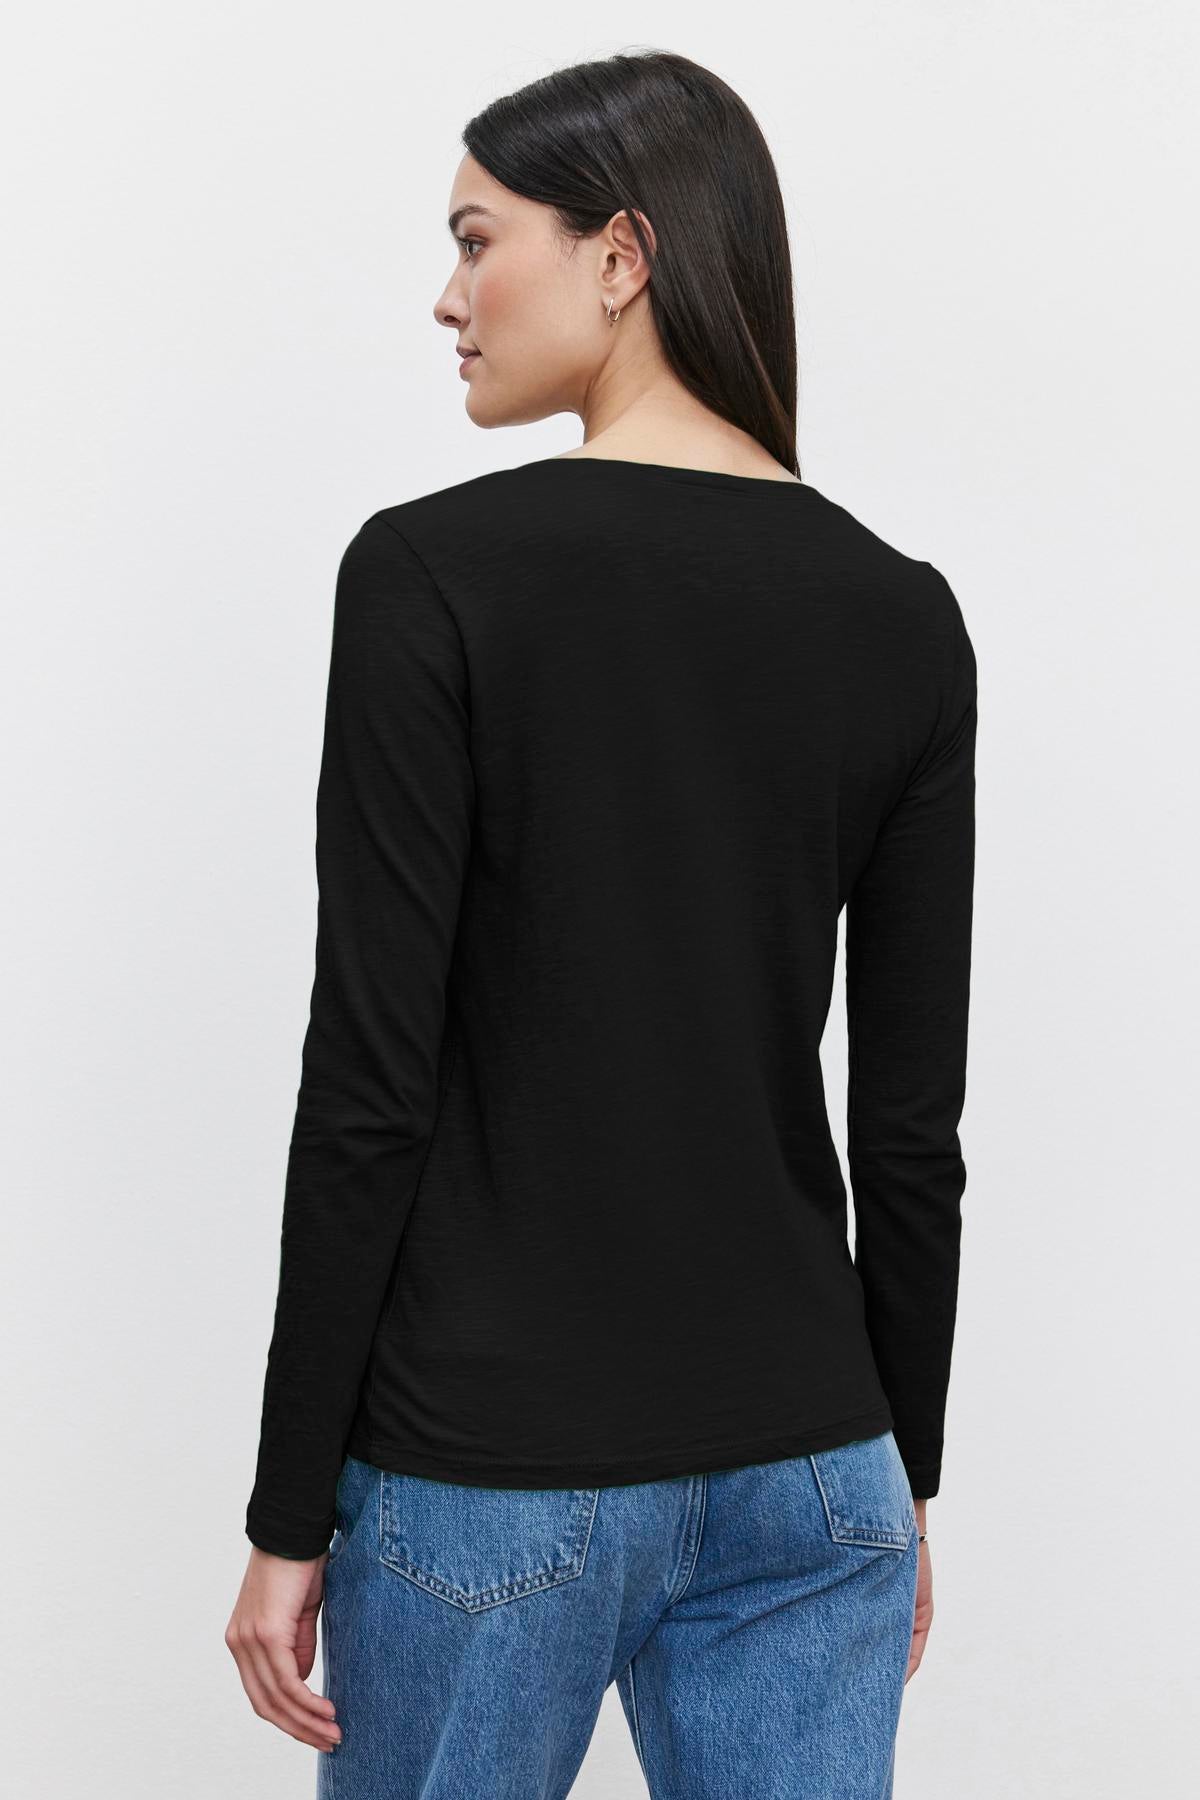   Person with long, dark hair wearing a black Velvet by Graham & Spencer BLAIRE TEE featuring a v-neckline and blue jeans, standing with their back to the camera against a plain white background. 